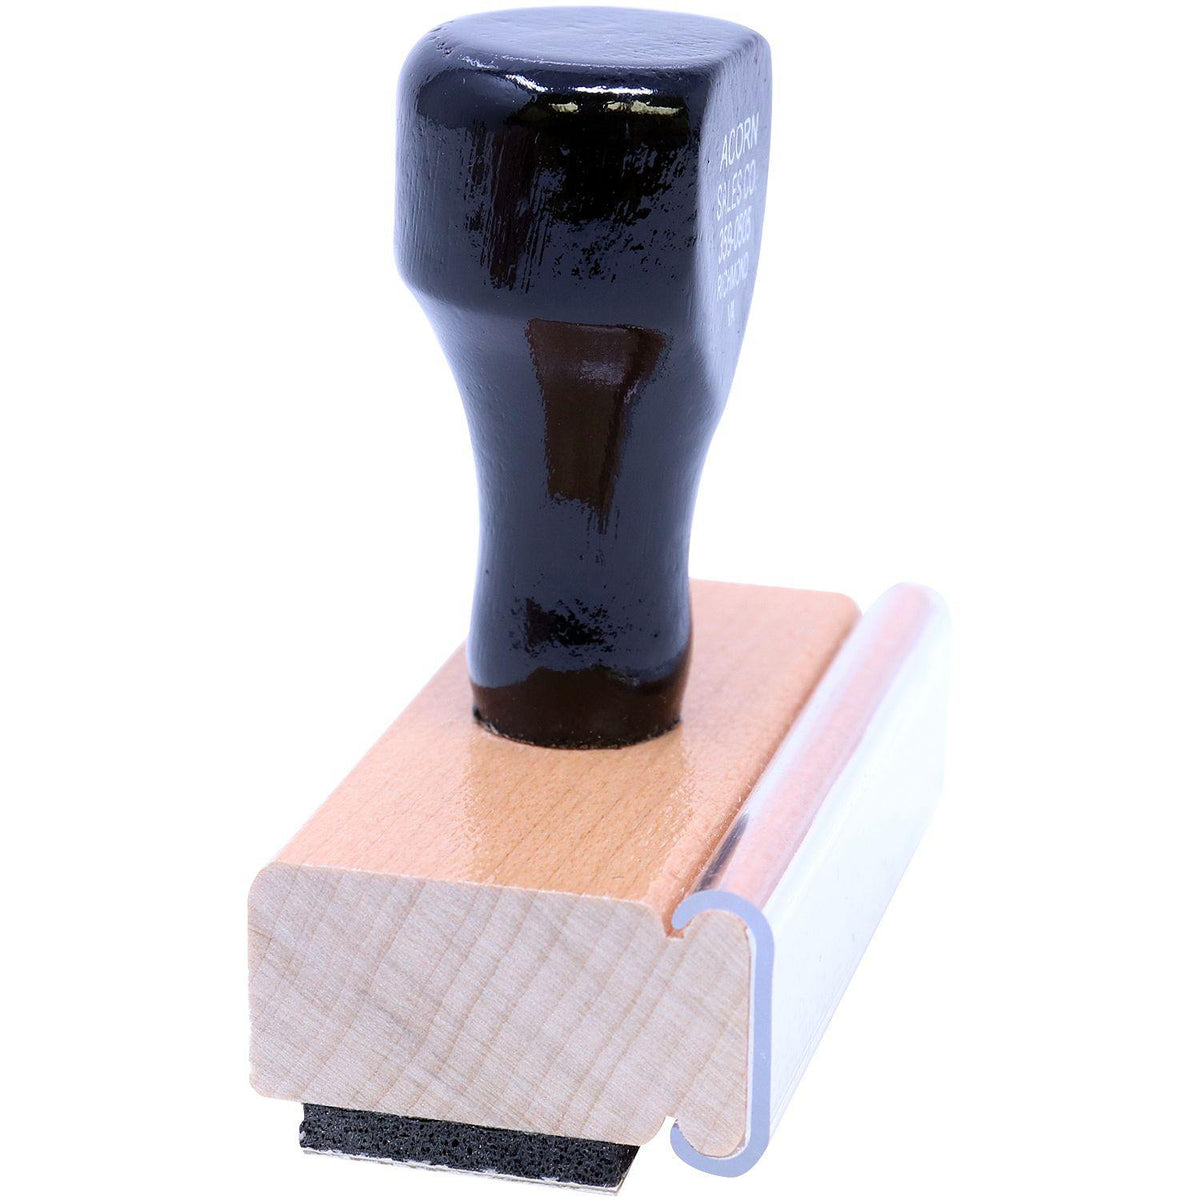 Side View of Large Rh Negative Rubber Stamp at an Angle